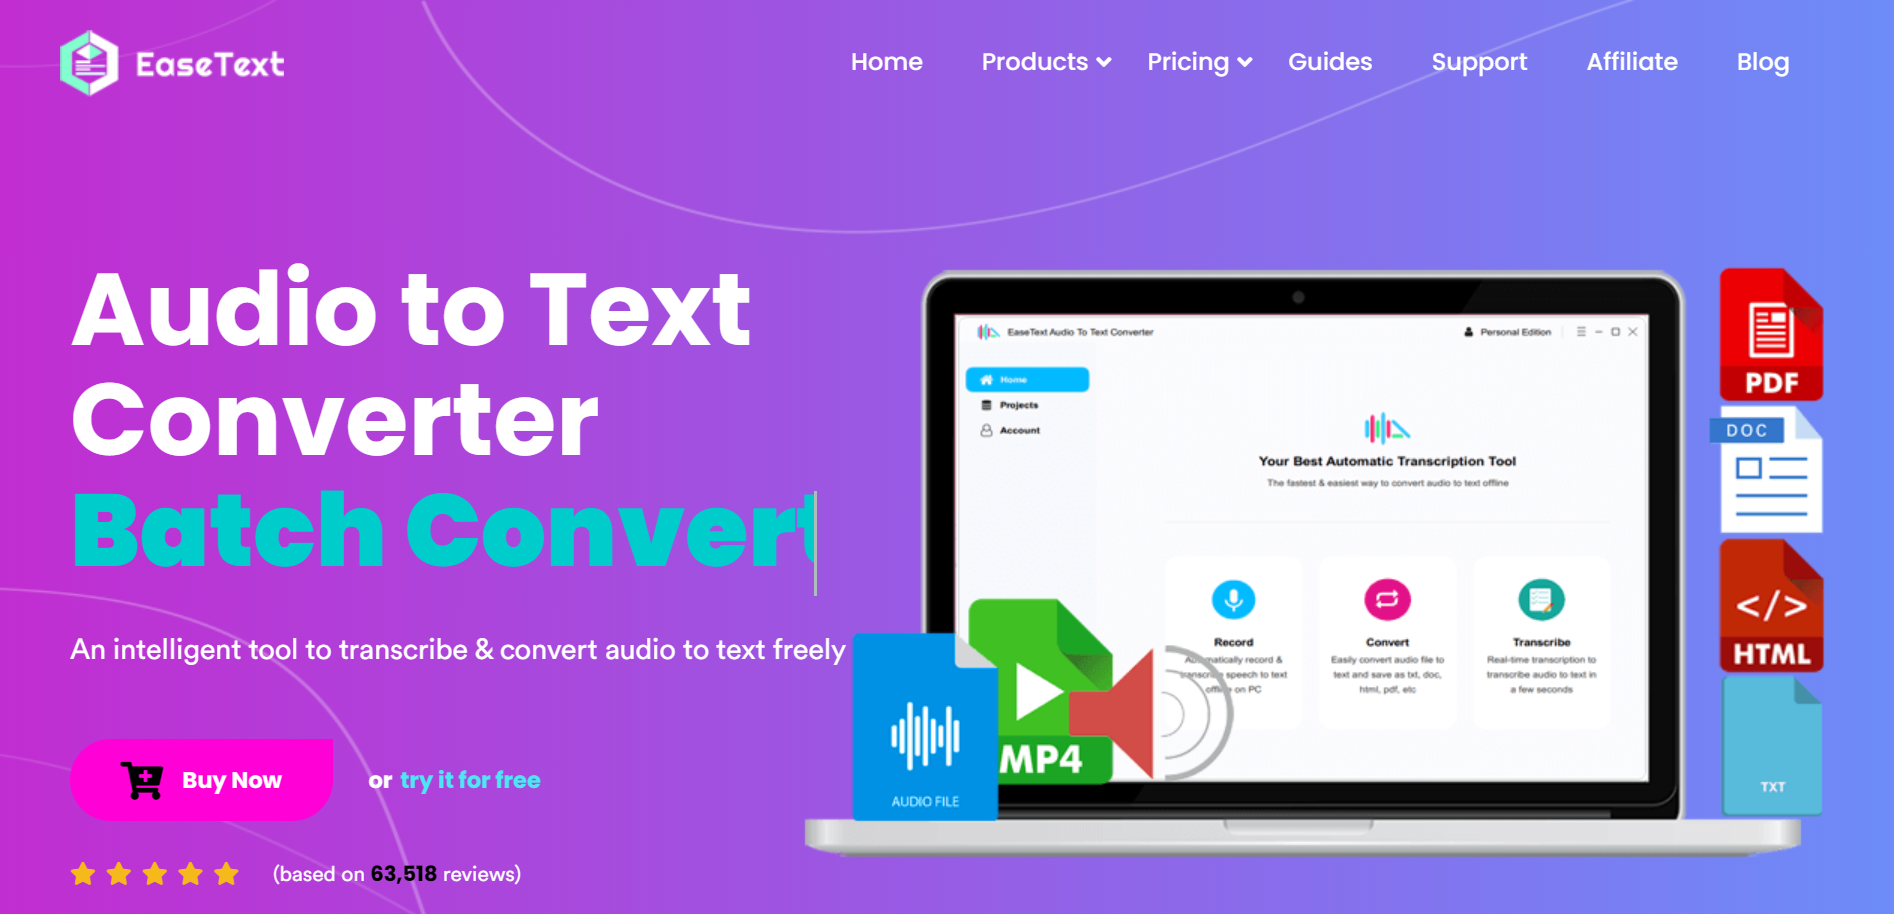 EaseText-Review-Audio-to-Text-Converter